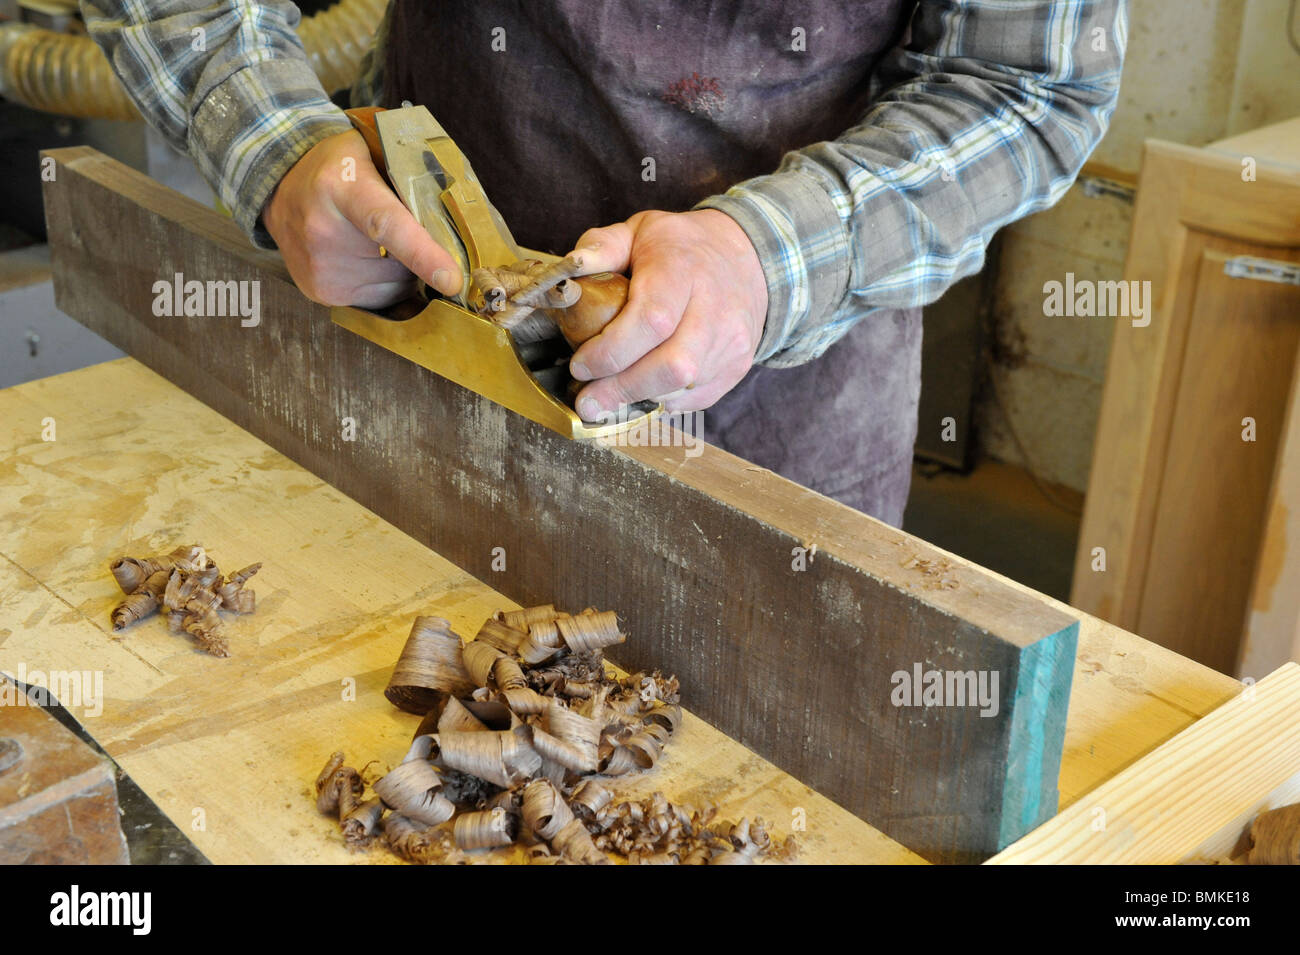 Carpenter crafting wood using a traditional plane Stock Photo